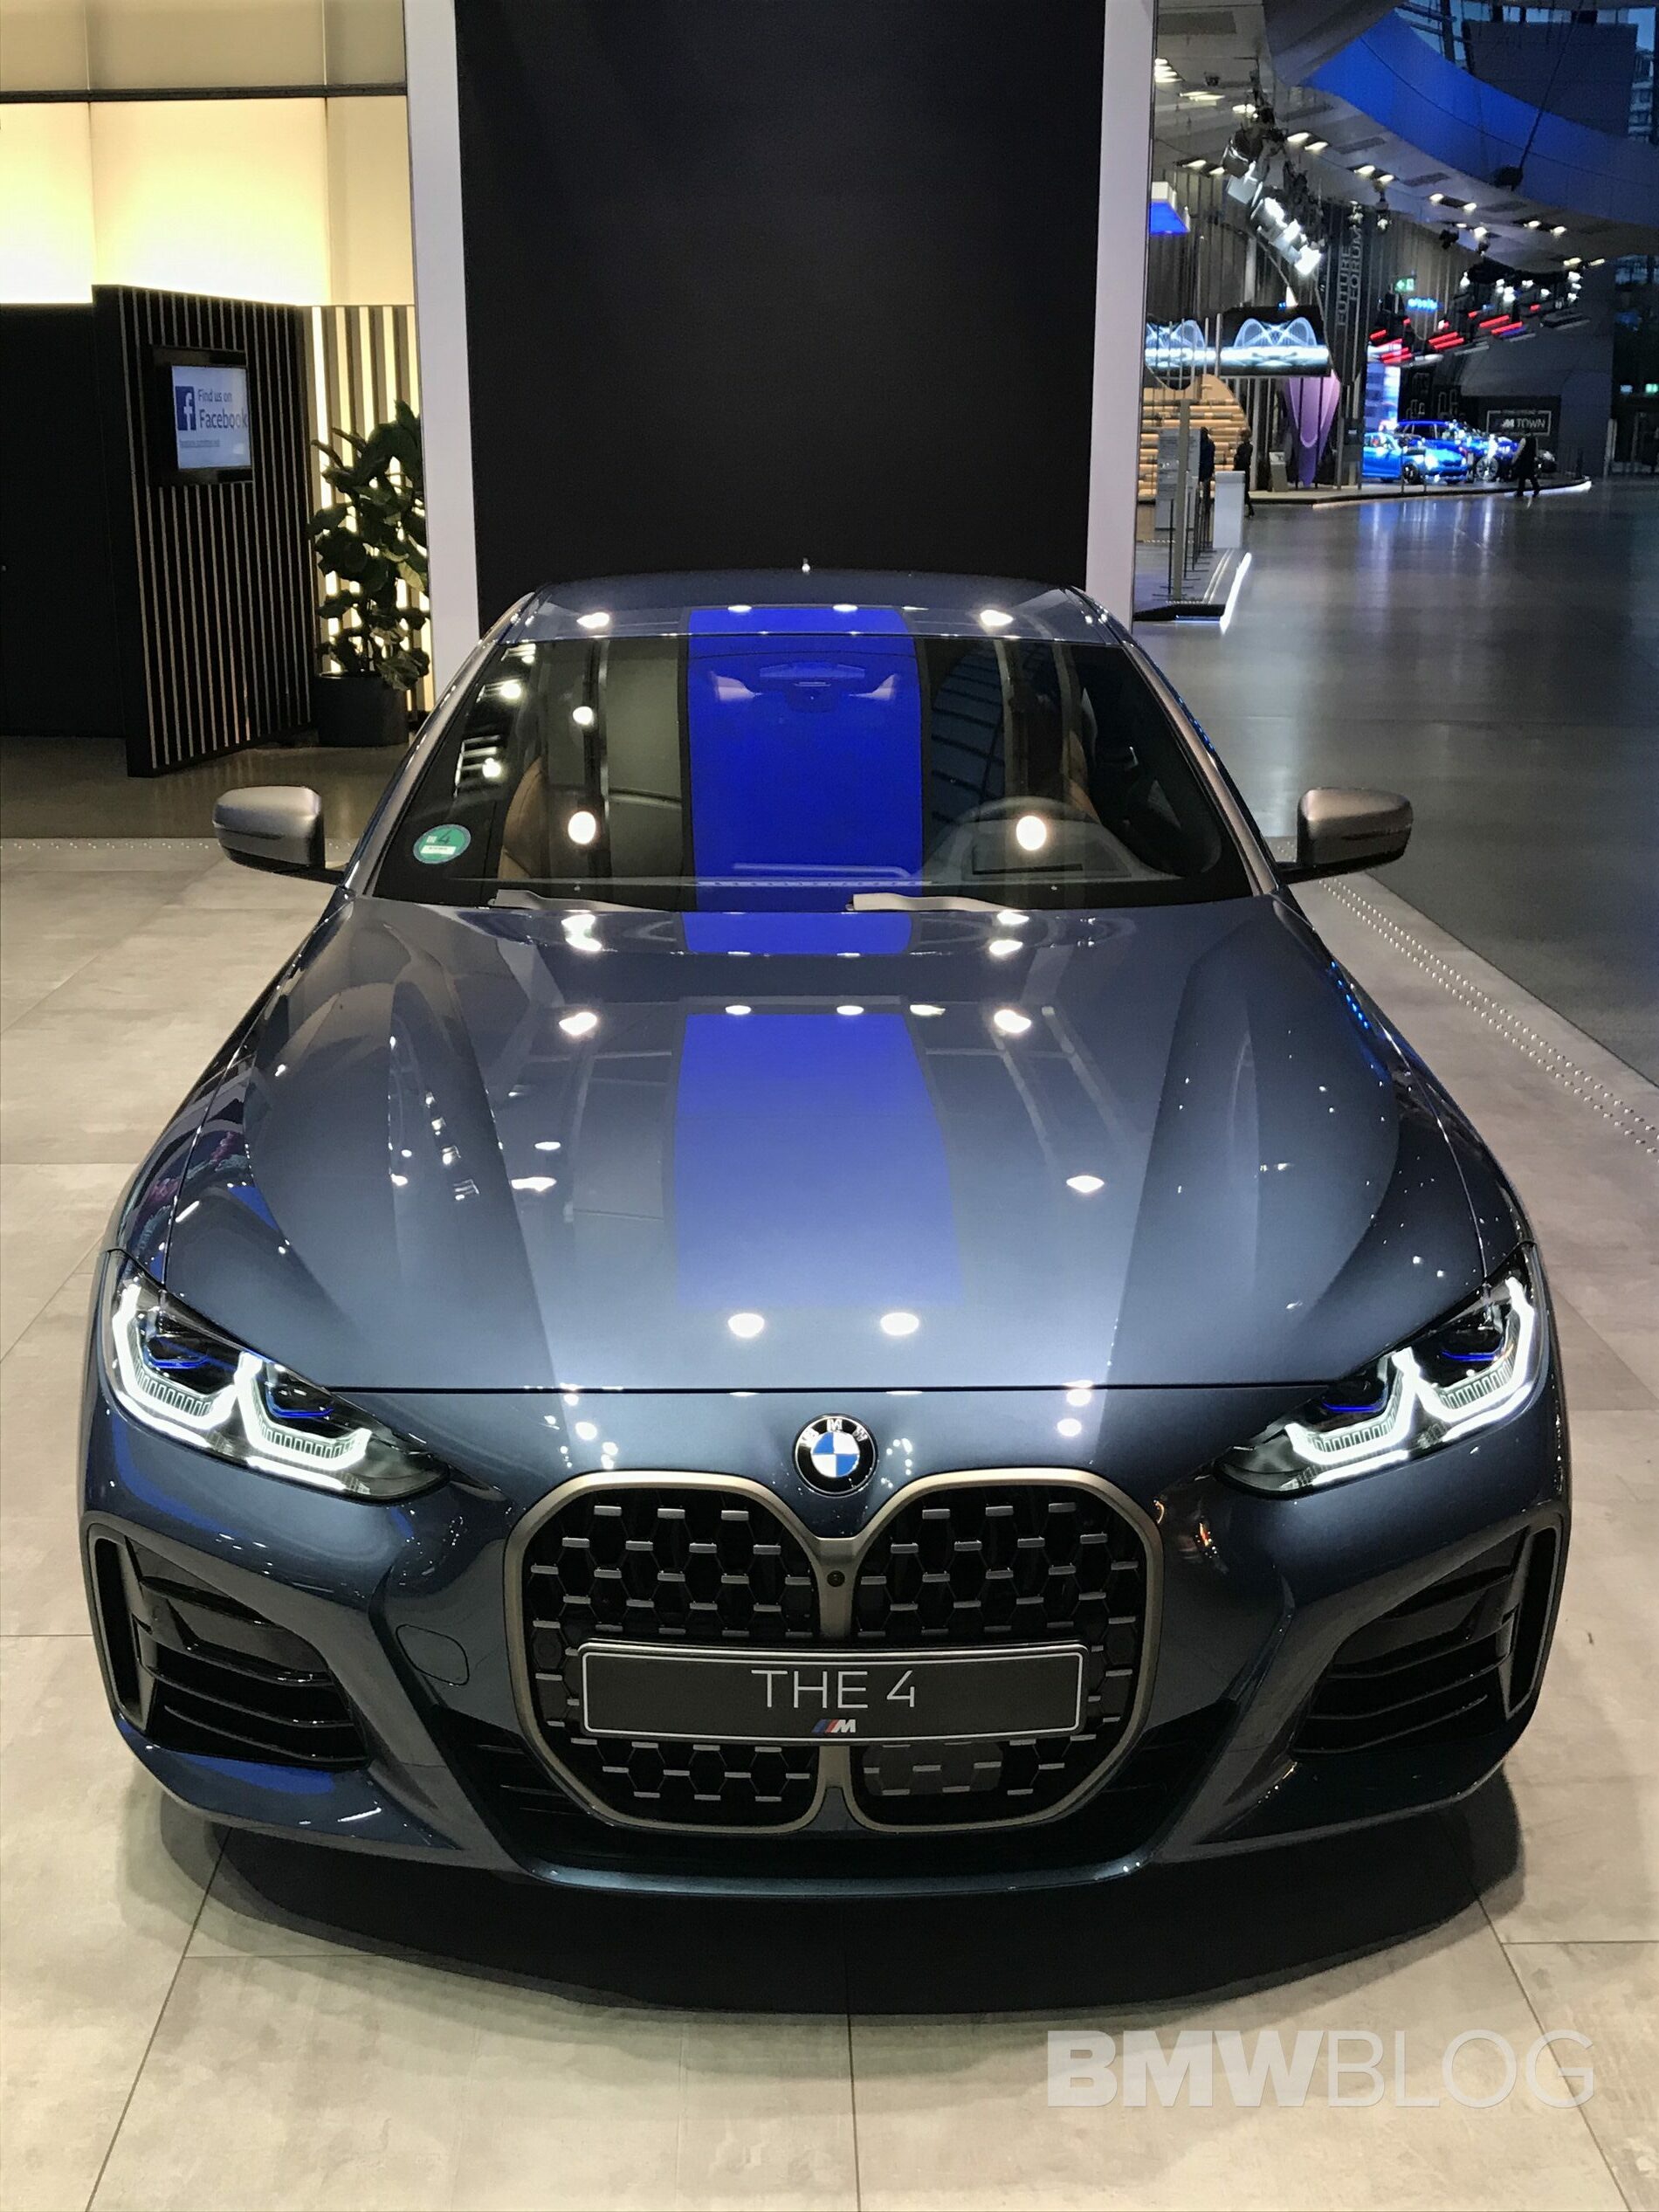 BMW M440i in Artic Race Blue - Exclusive Real Life Photos